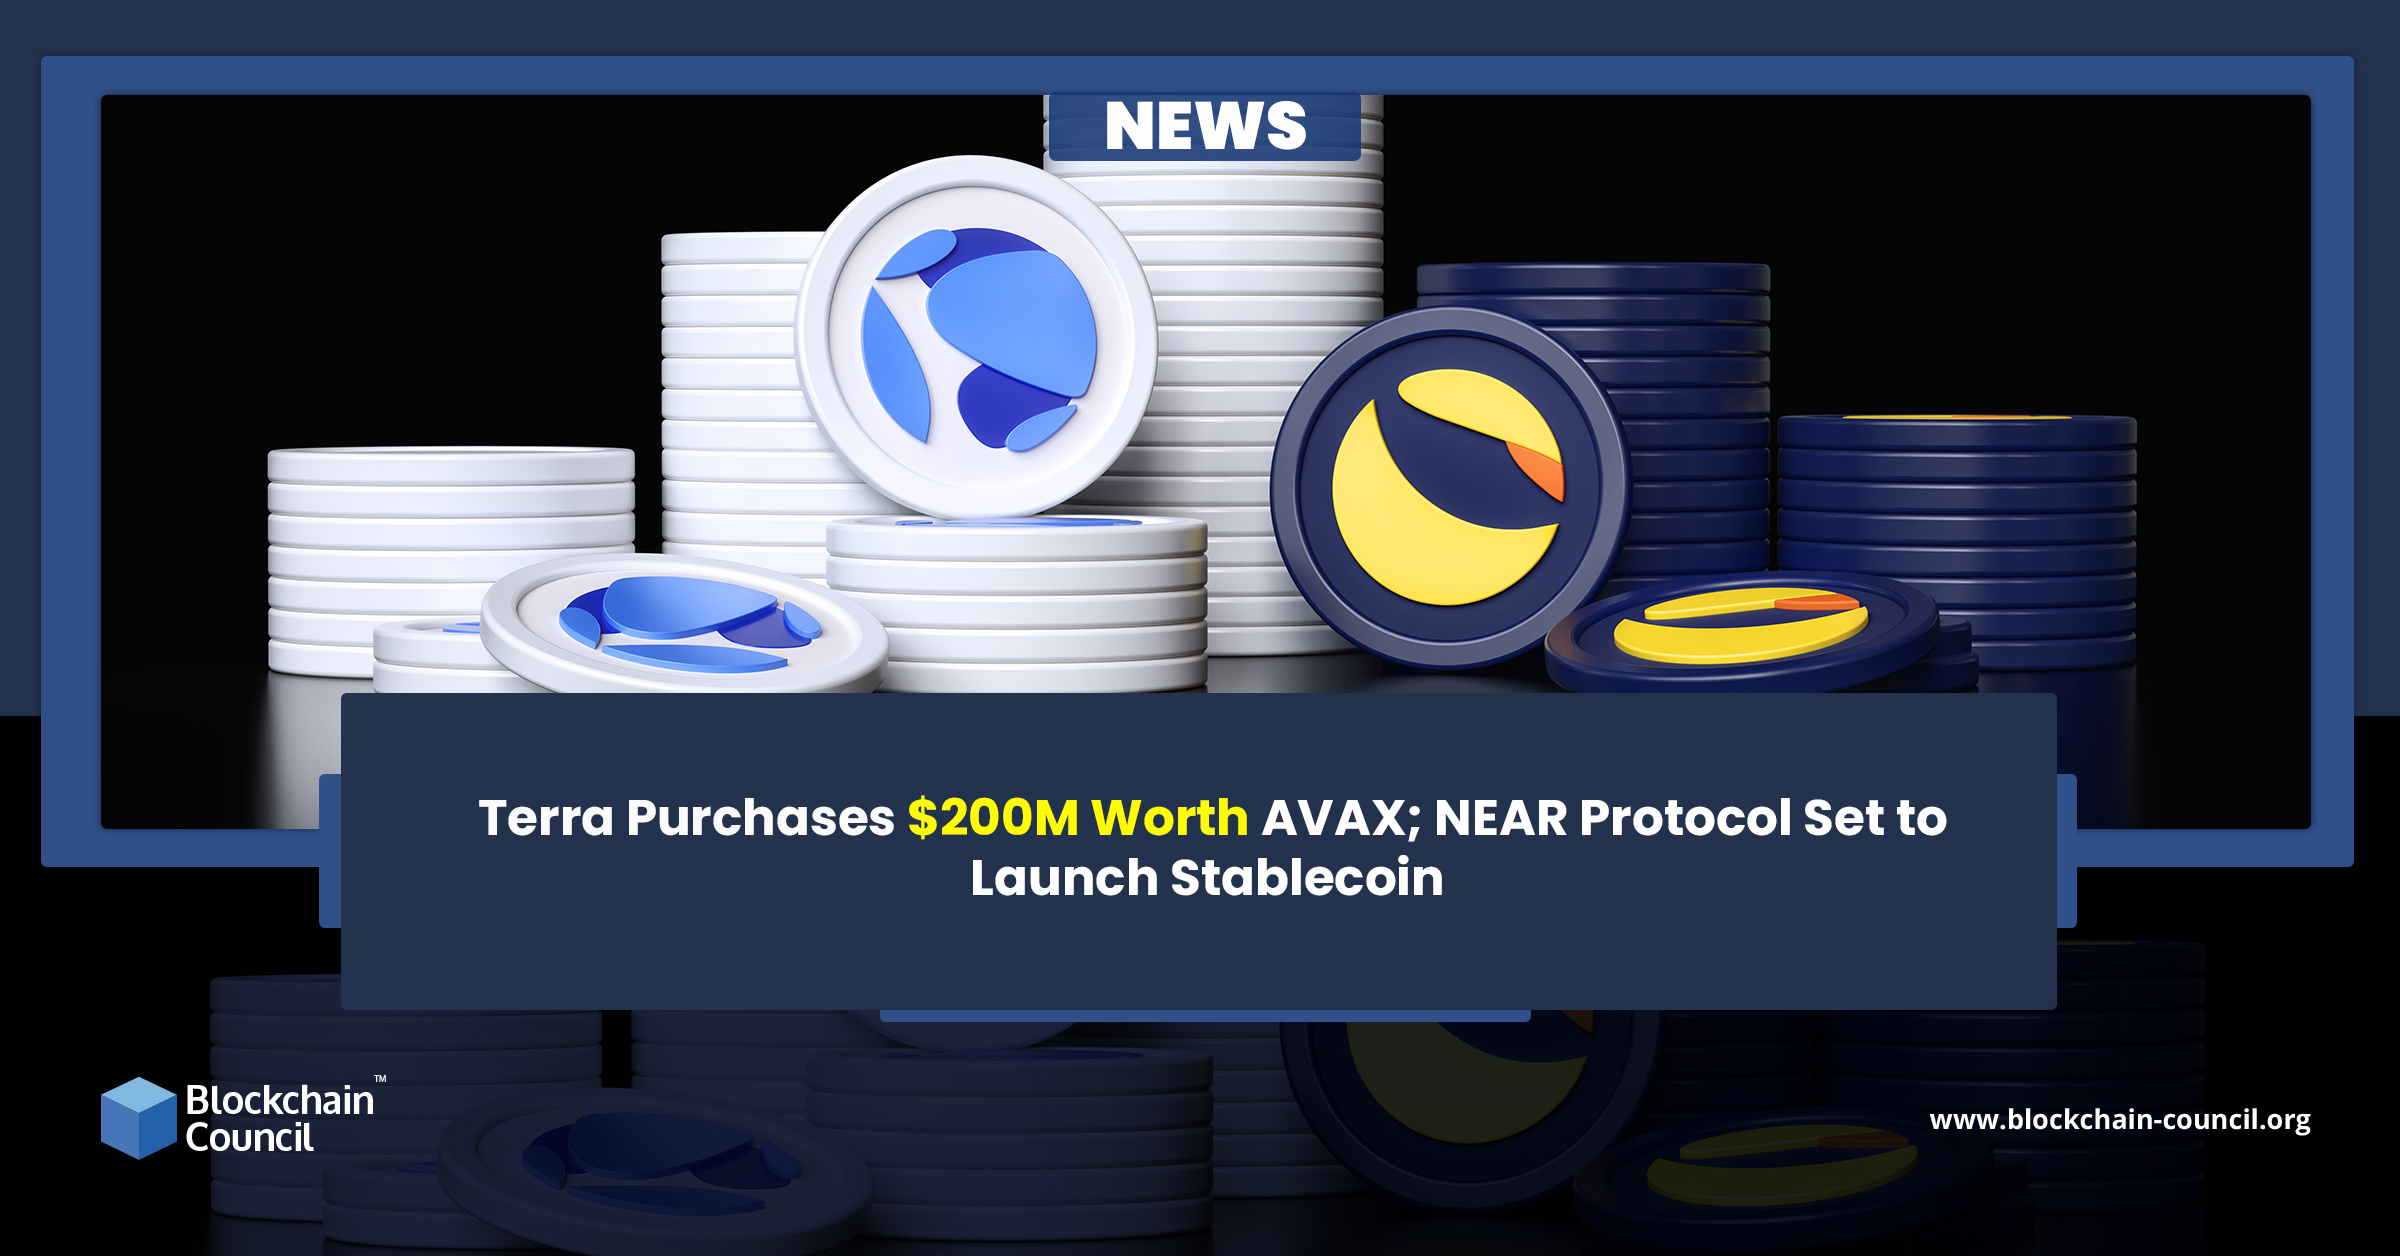 Terra Purchases $200M Worth AVAX; NEAR Protocol Set to Launch Stablecoin